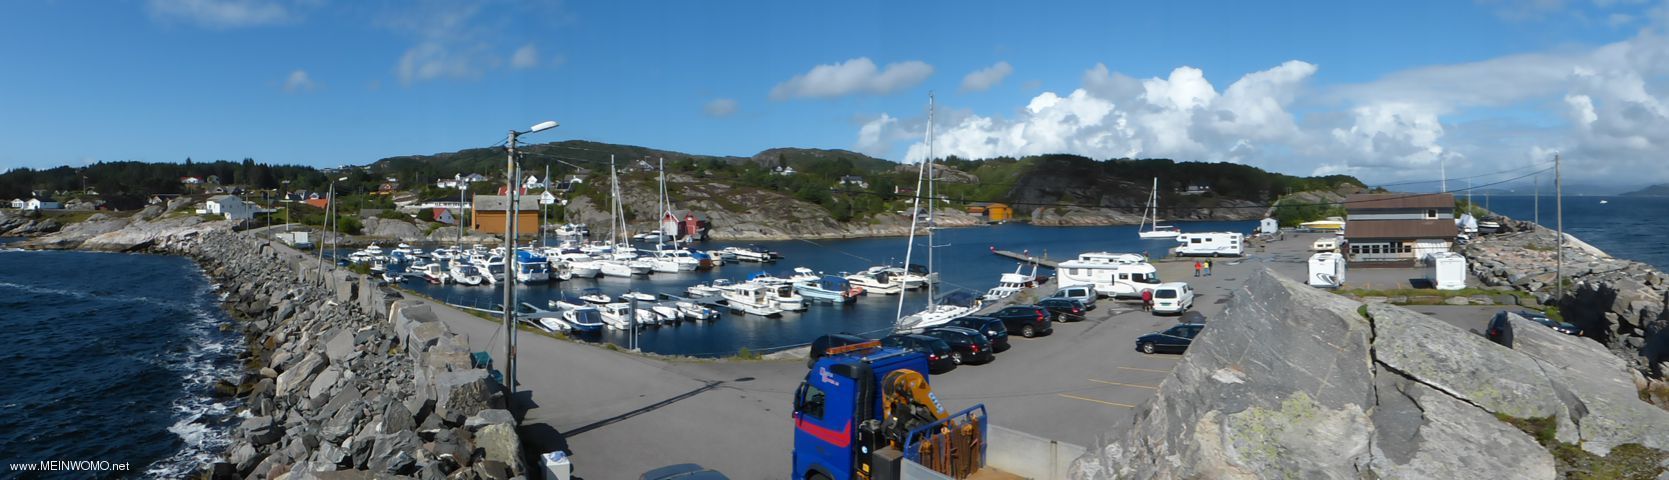  Panoramic views over the harbor.